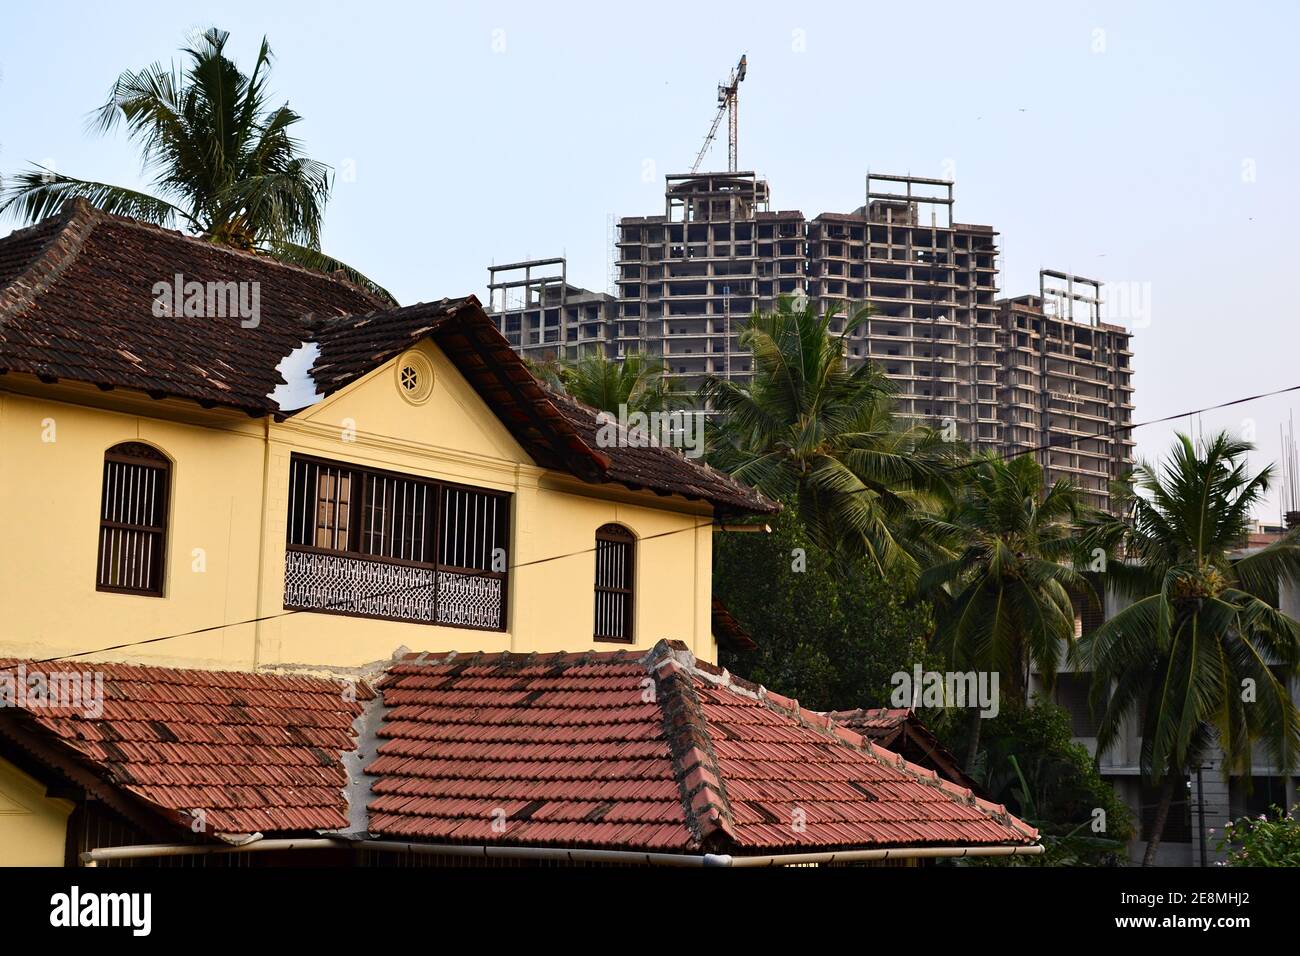 Old colonial building with shingle roof and construction site with crane on the background, Mangalore, India Stock Photo